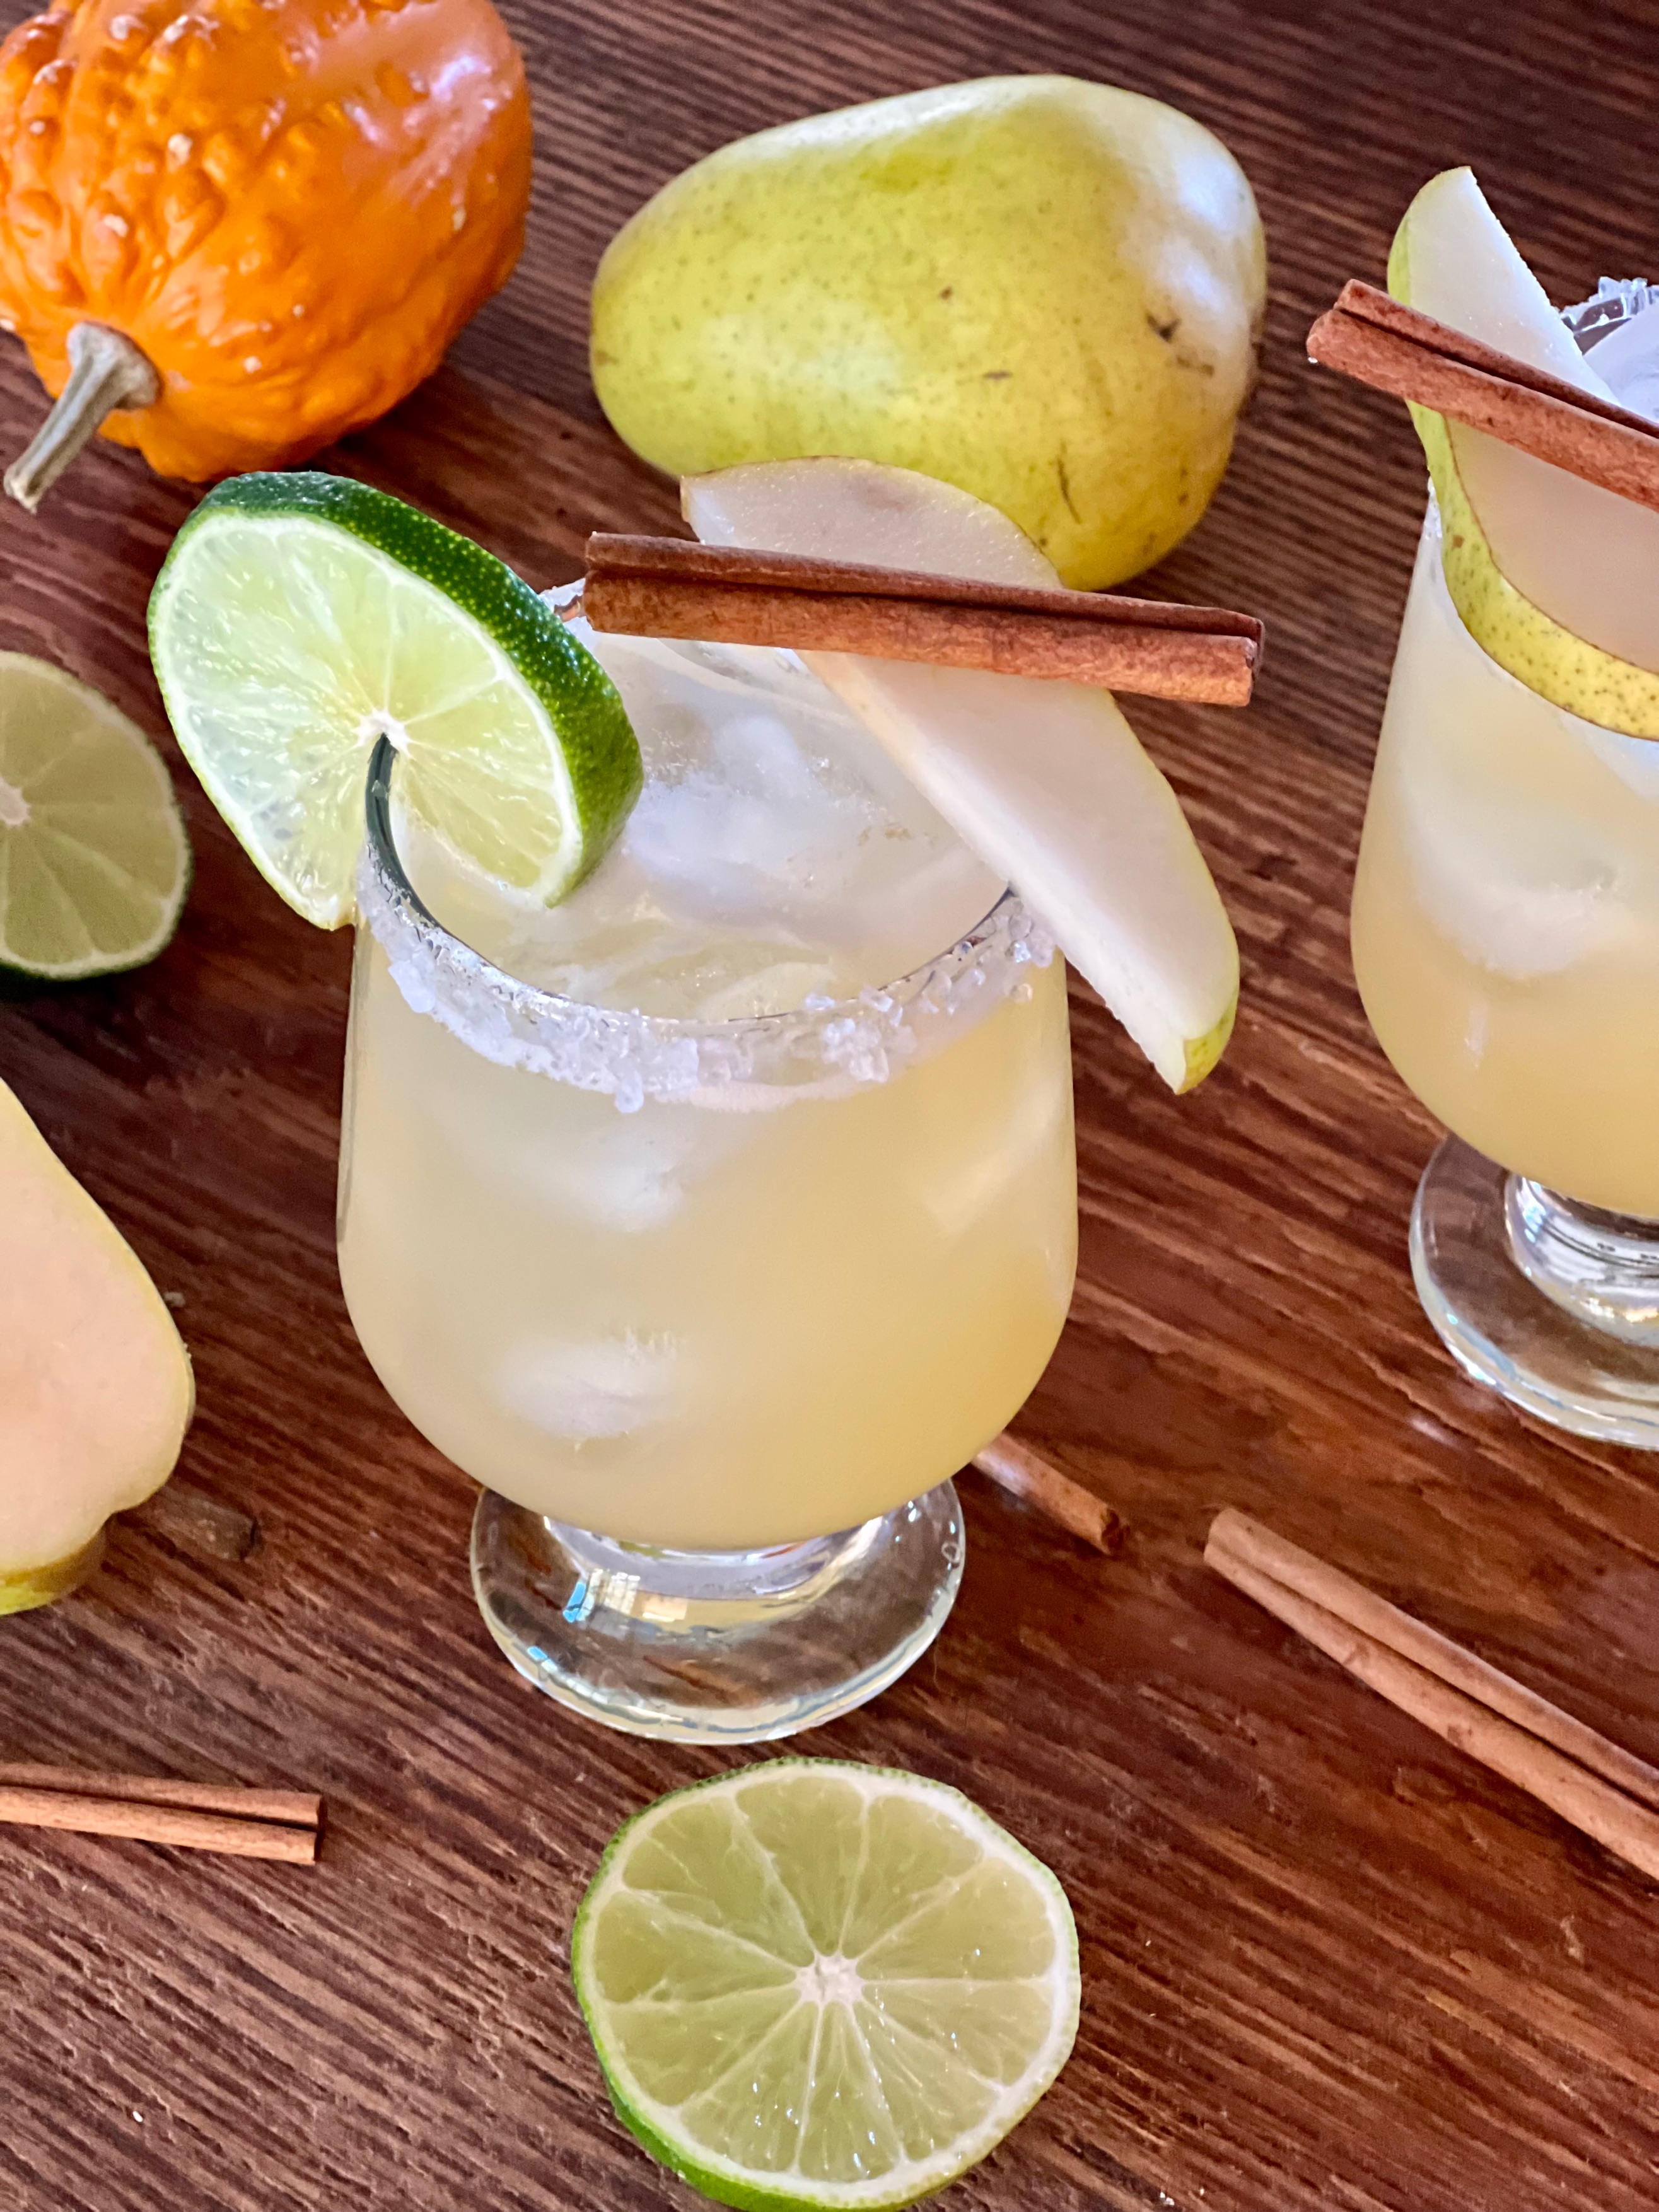 Spiced Pear and ginger margarita cocktail recipe